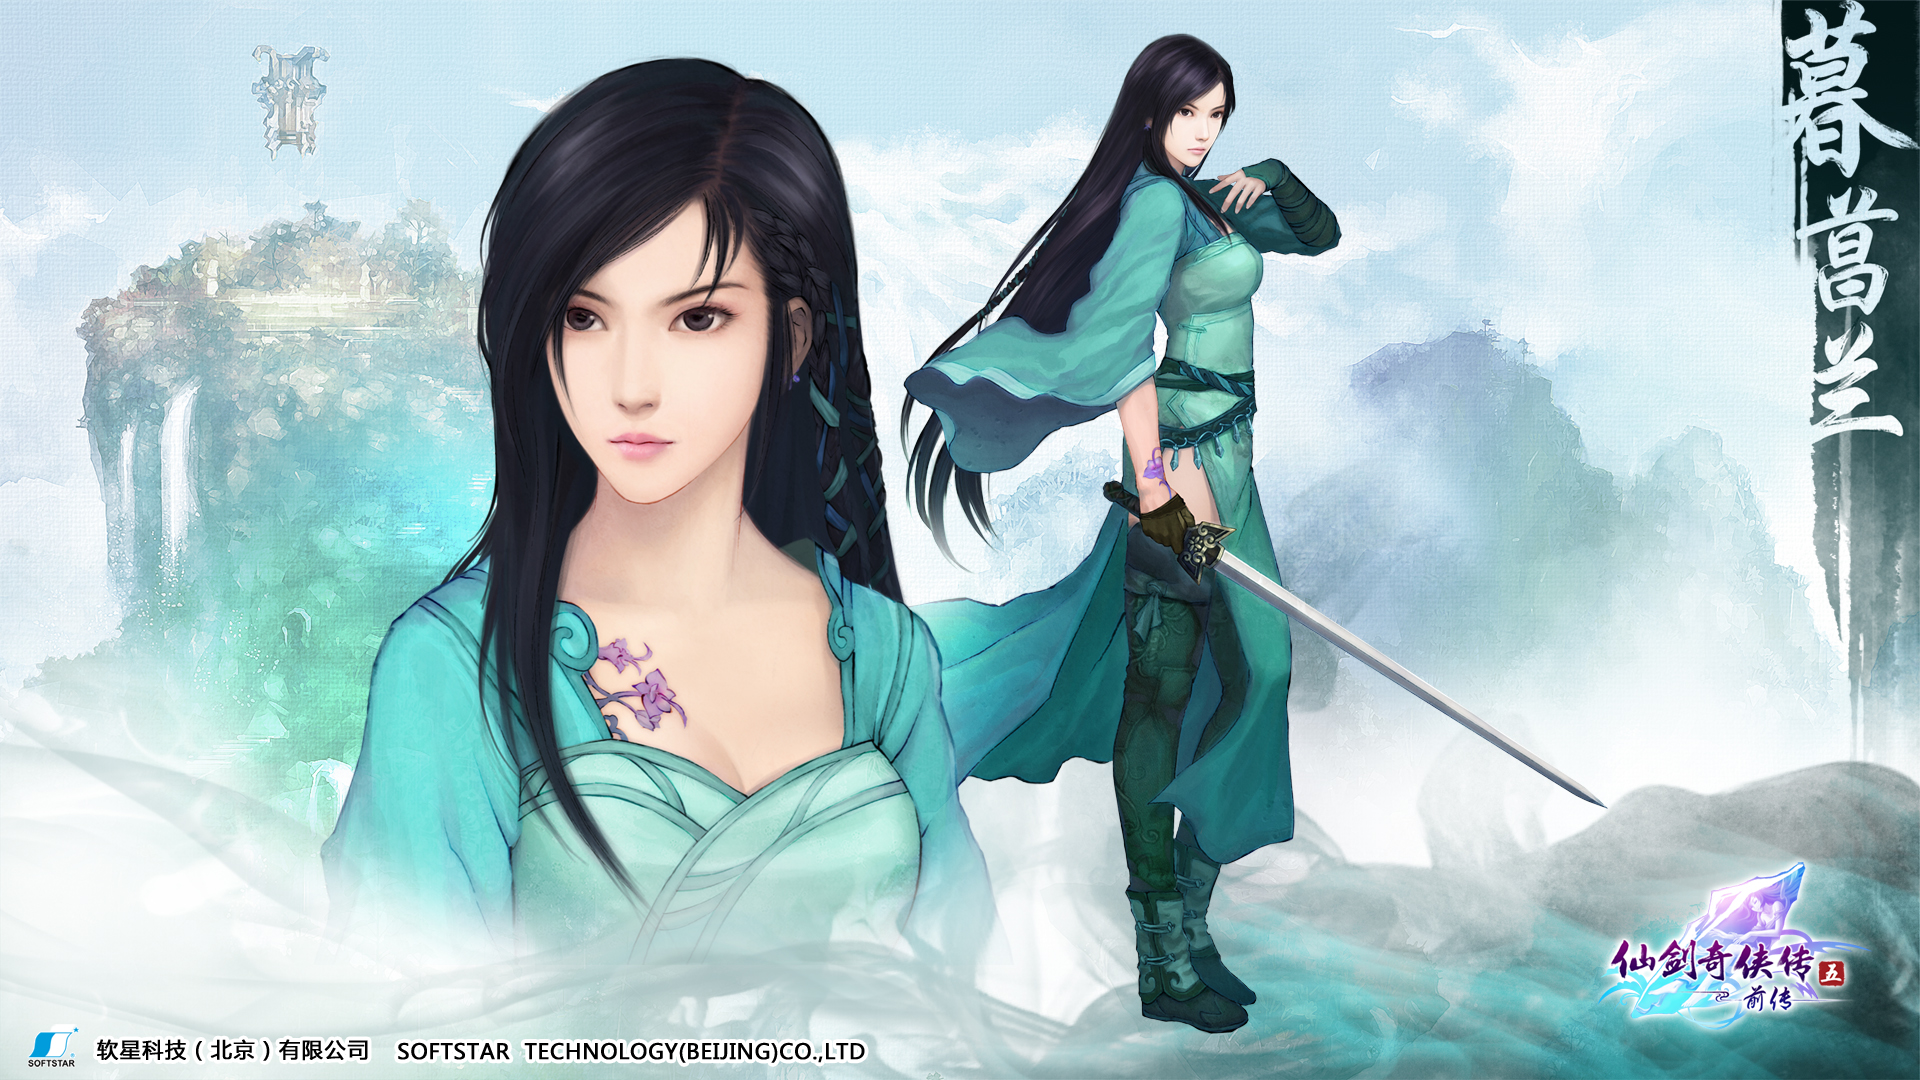 the, Legend, Of, Sword, And, Fairy, Chinese, Paladin, Fantasy, Wuxia,  37 Wallpaper